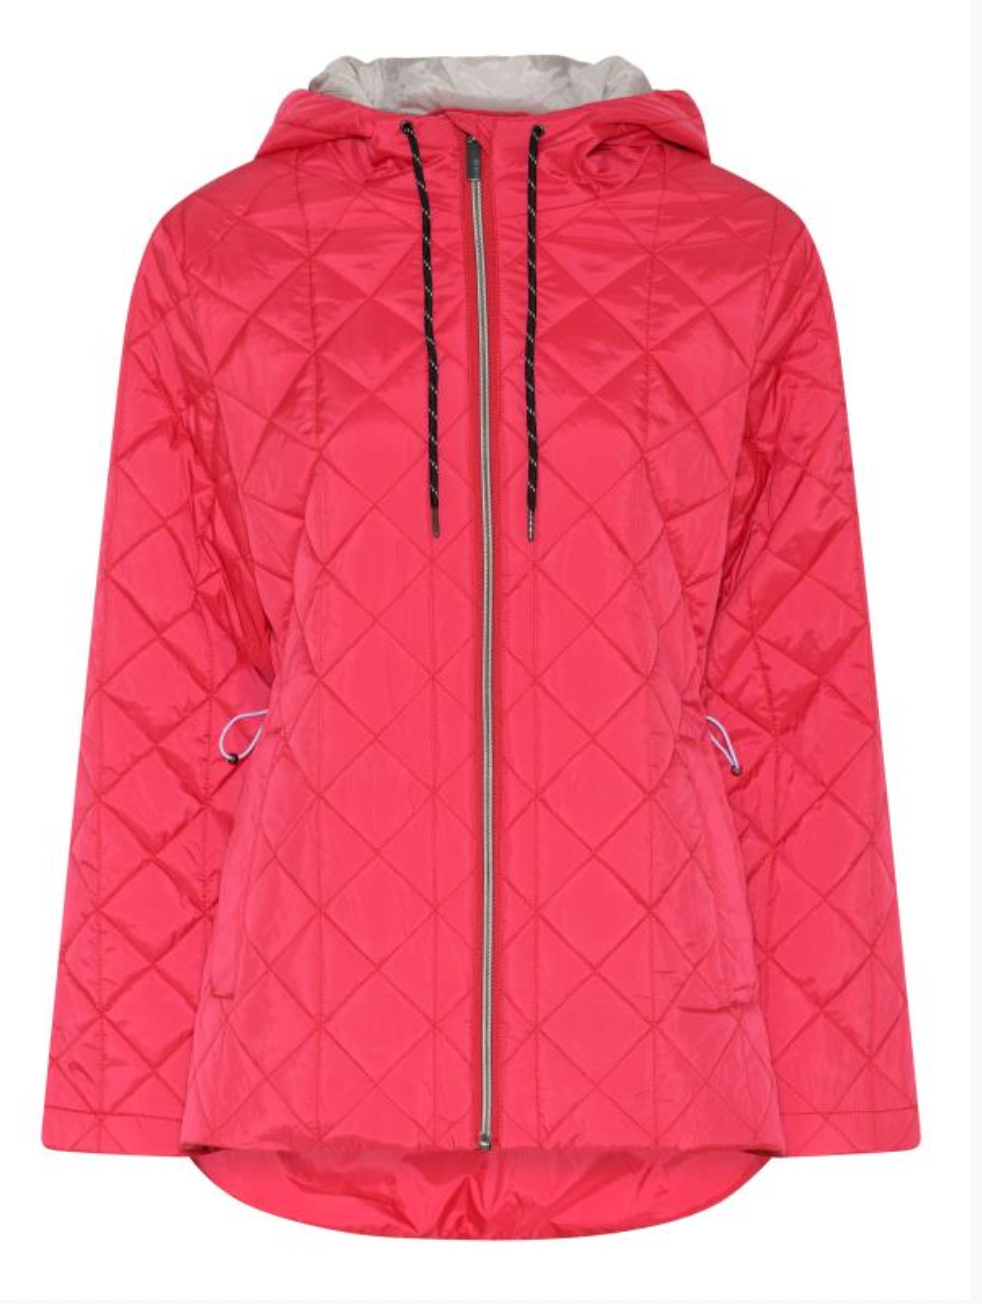 Red Quilted Zip Jacket With Hood